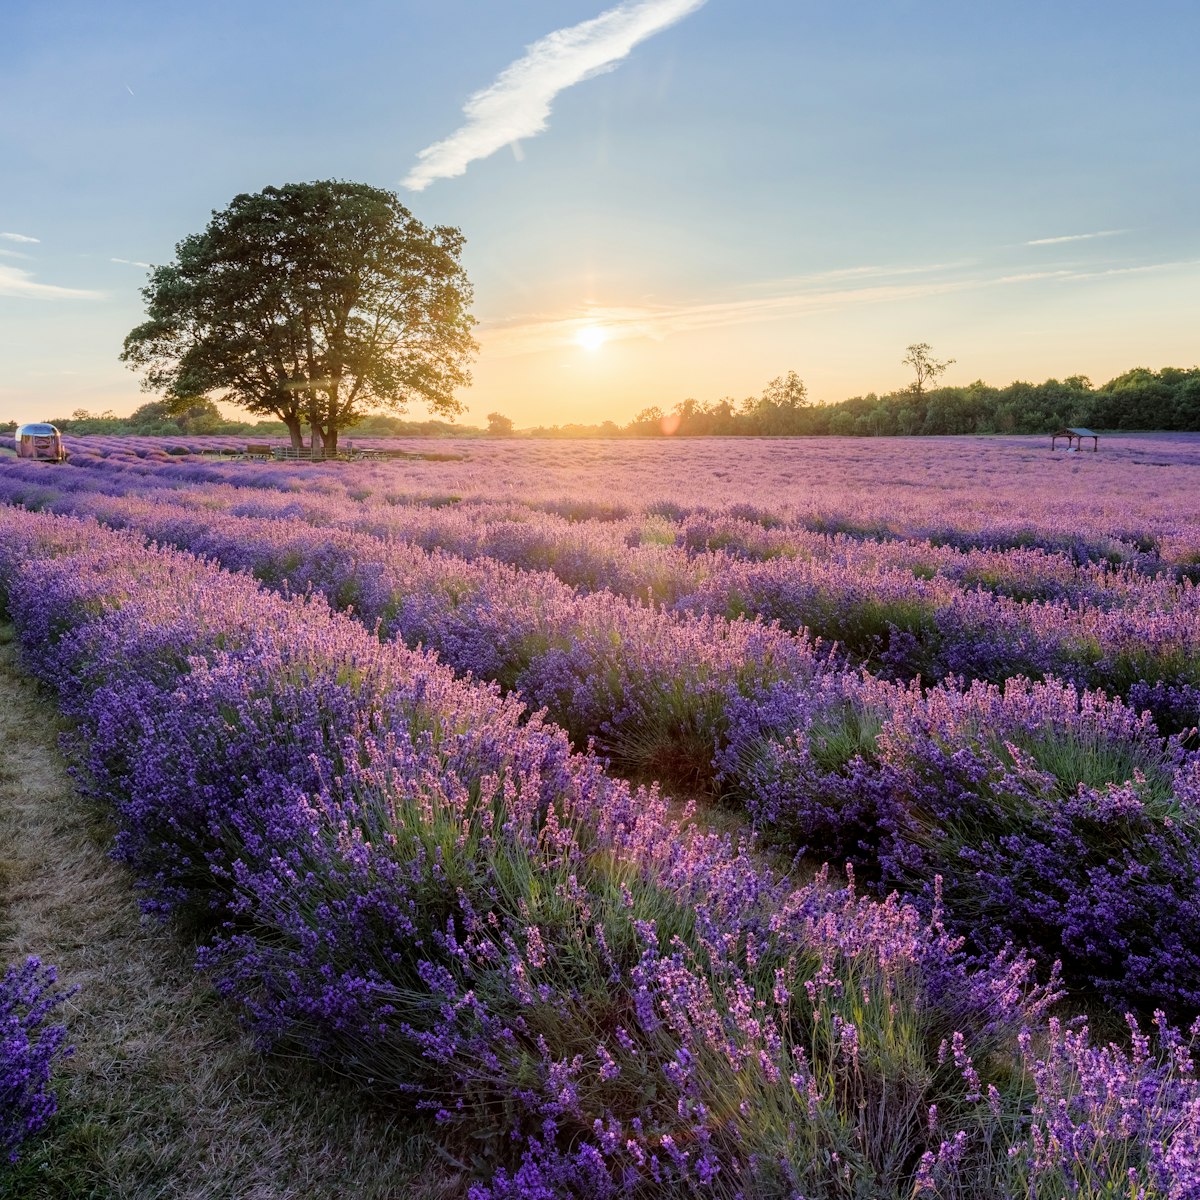 An evening at Mayfield Lavender Farm.